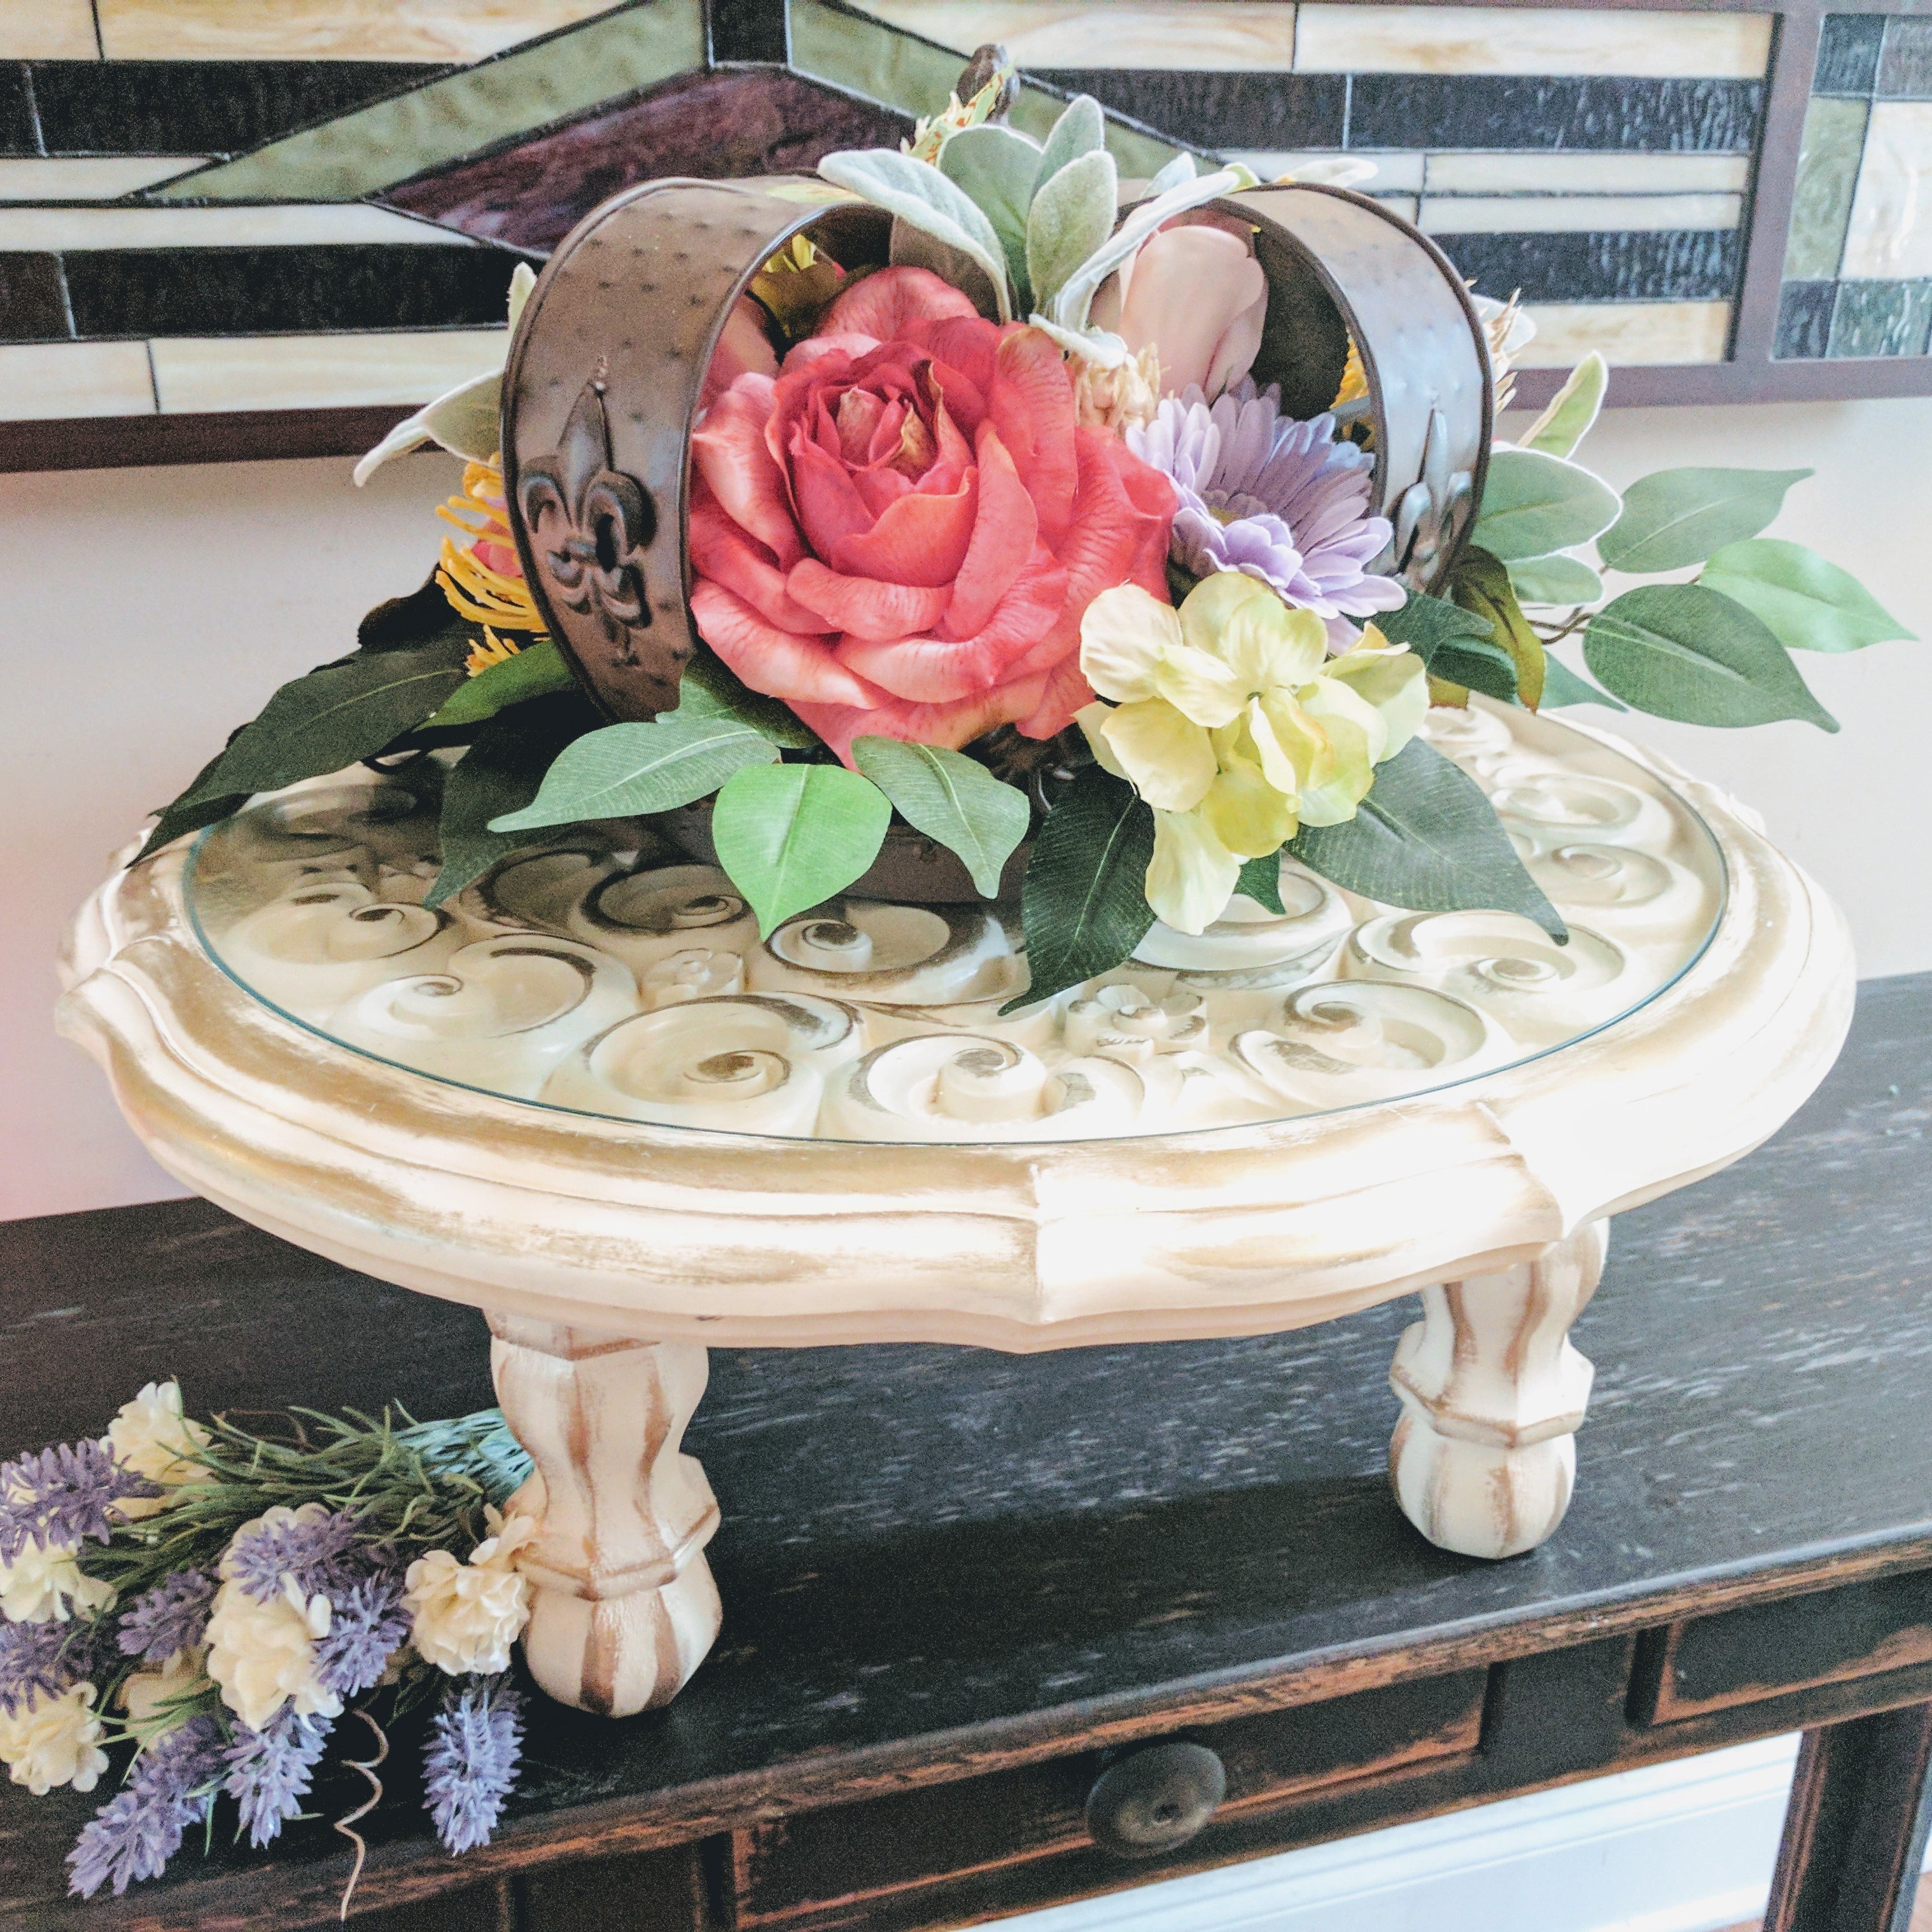 18" Ornate Glass Top Cake Stand- RENTAL - The Wedding Shop